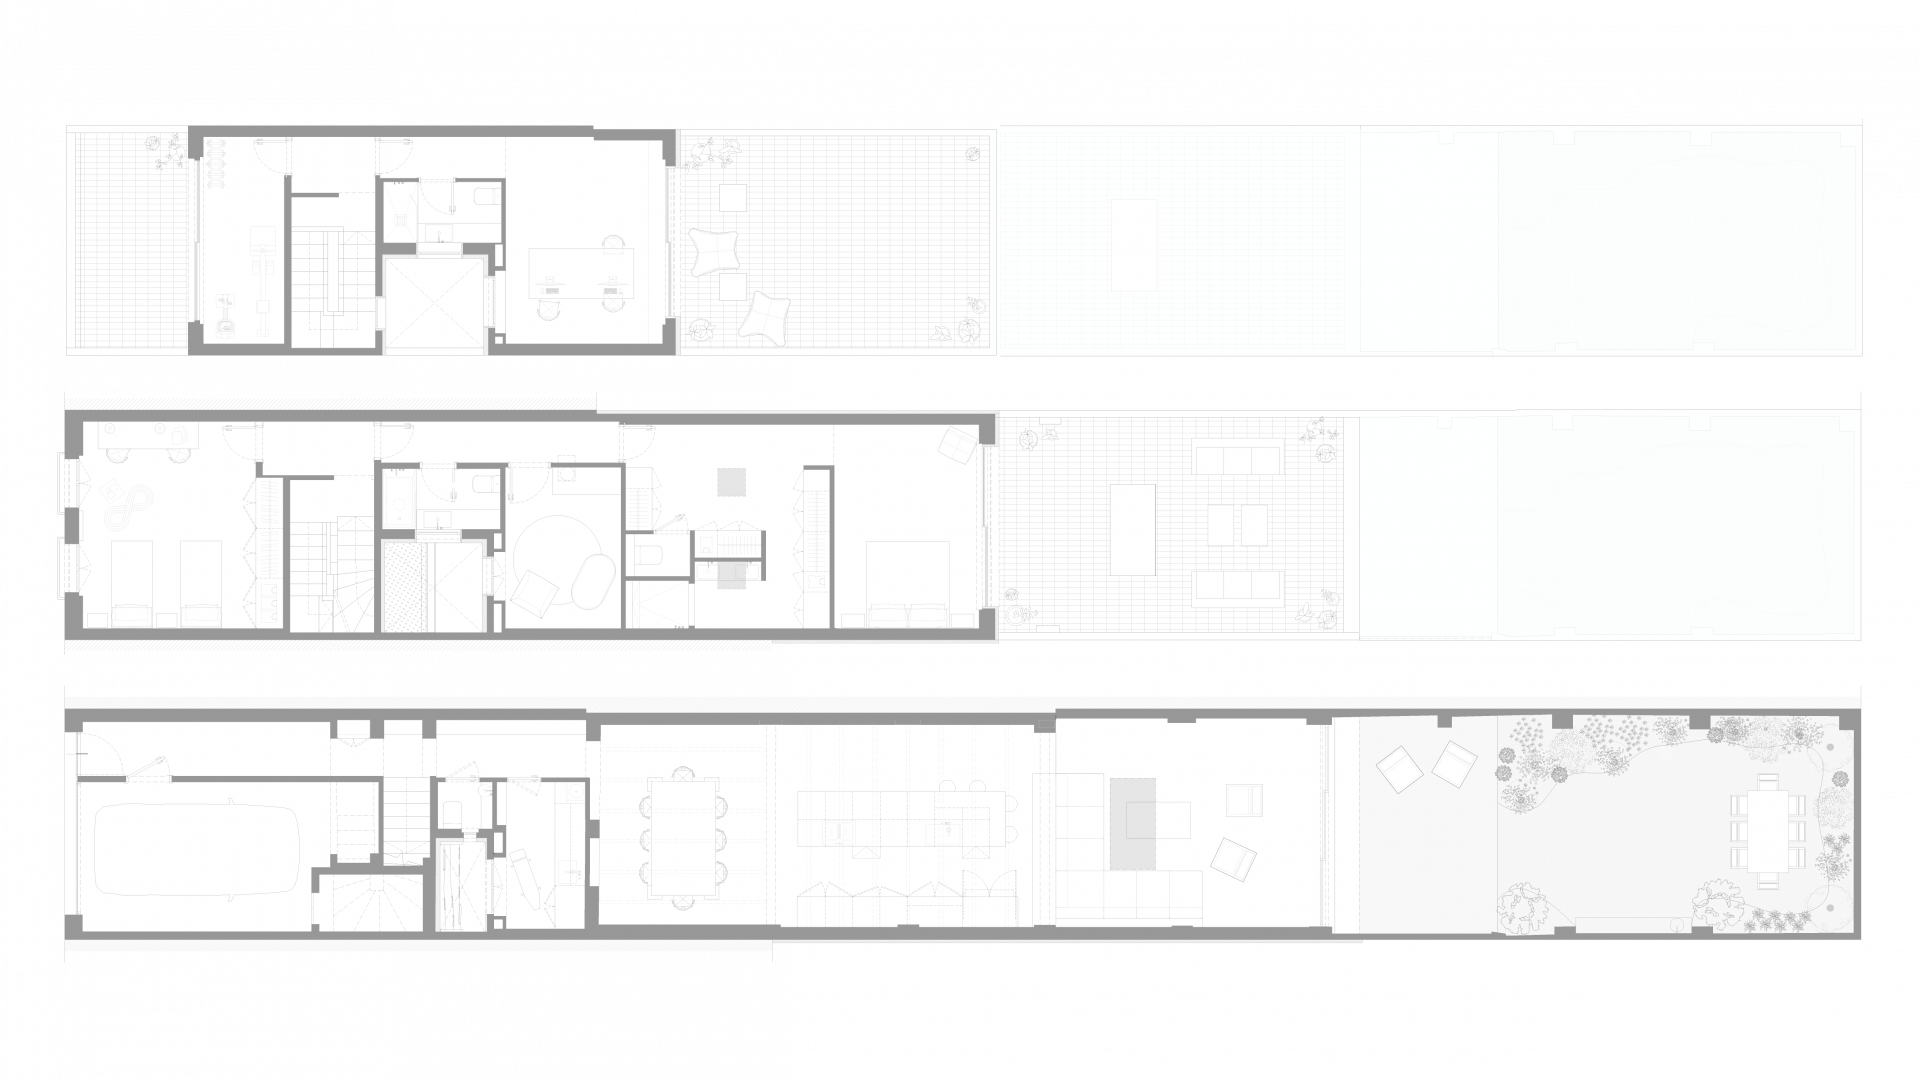 detailed floorplans of an architectural building